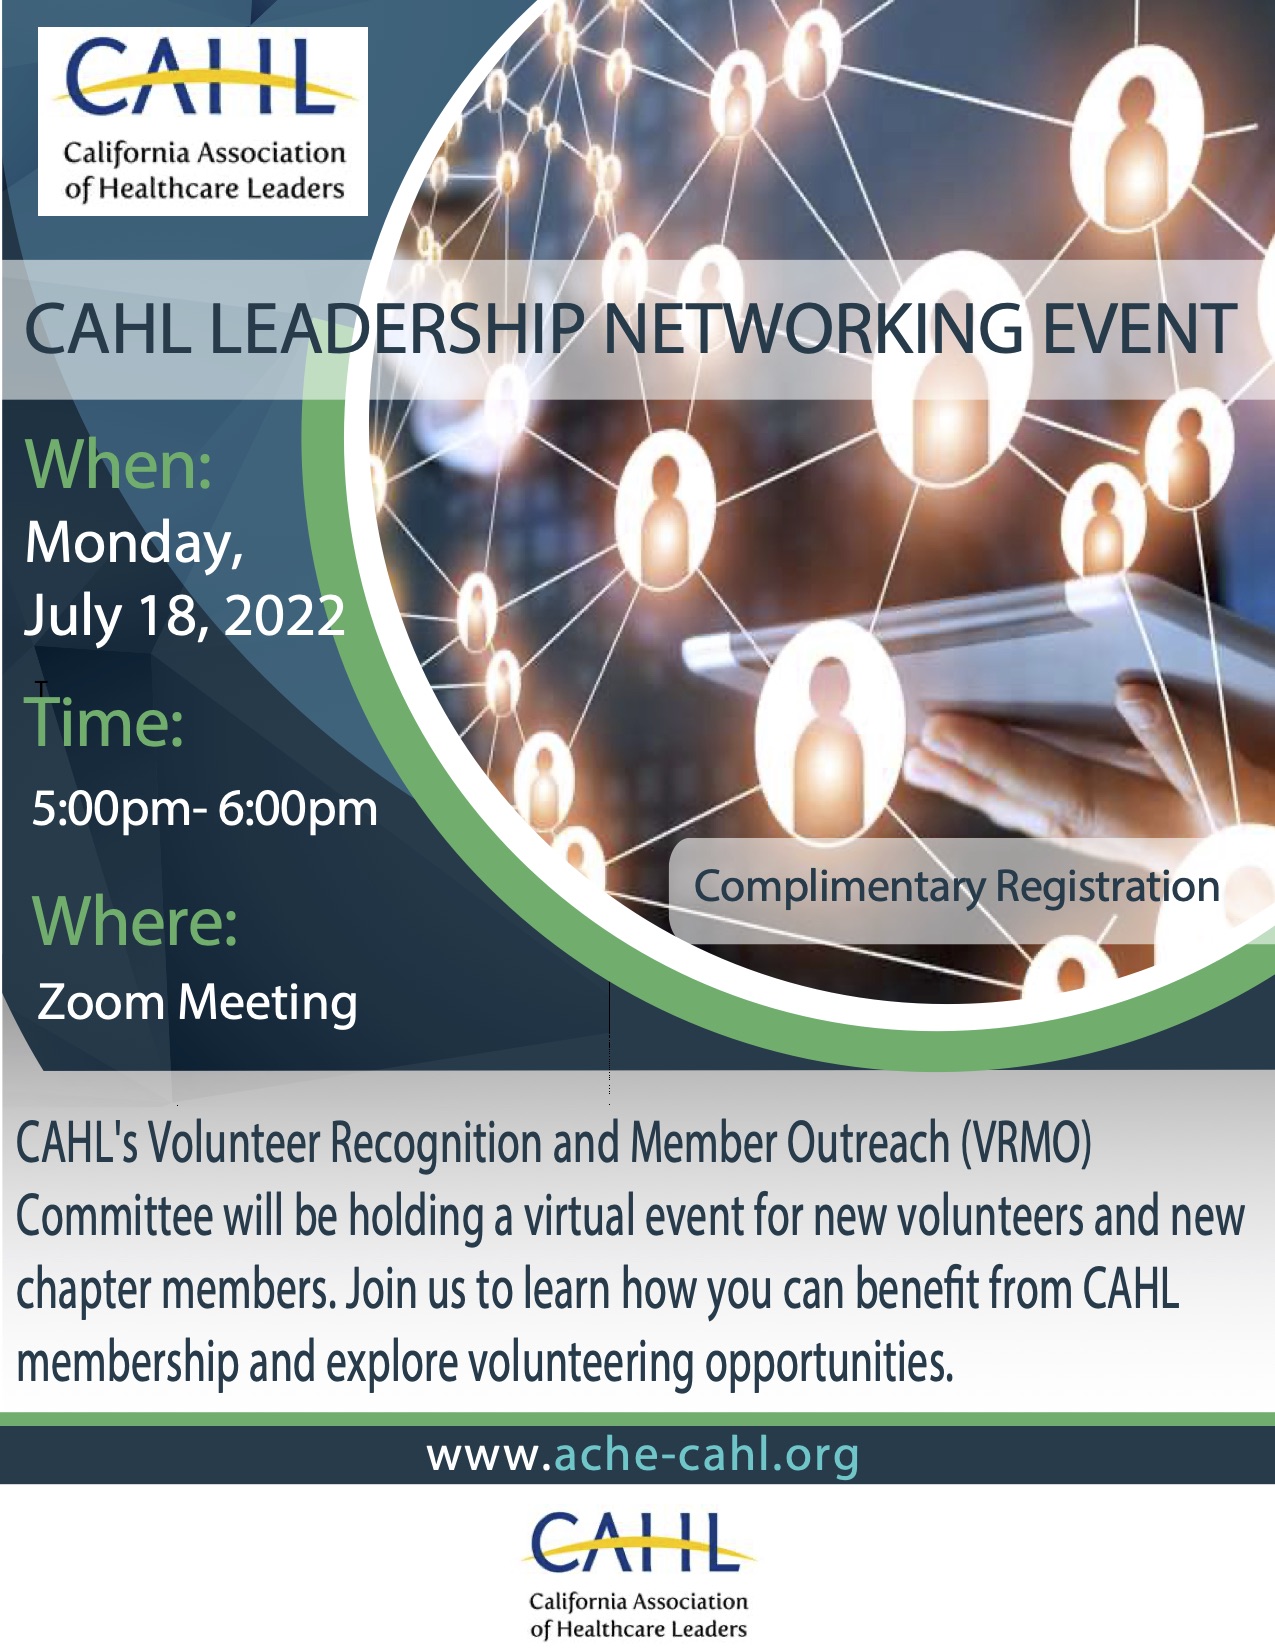 CAHL Leadership Networking event